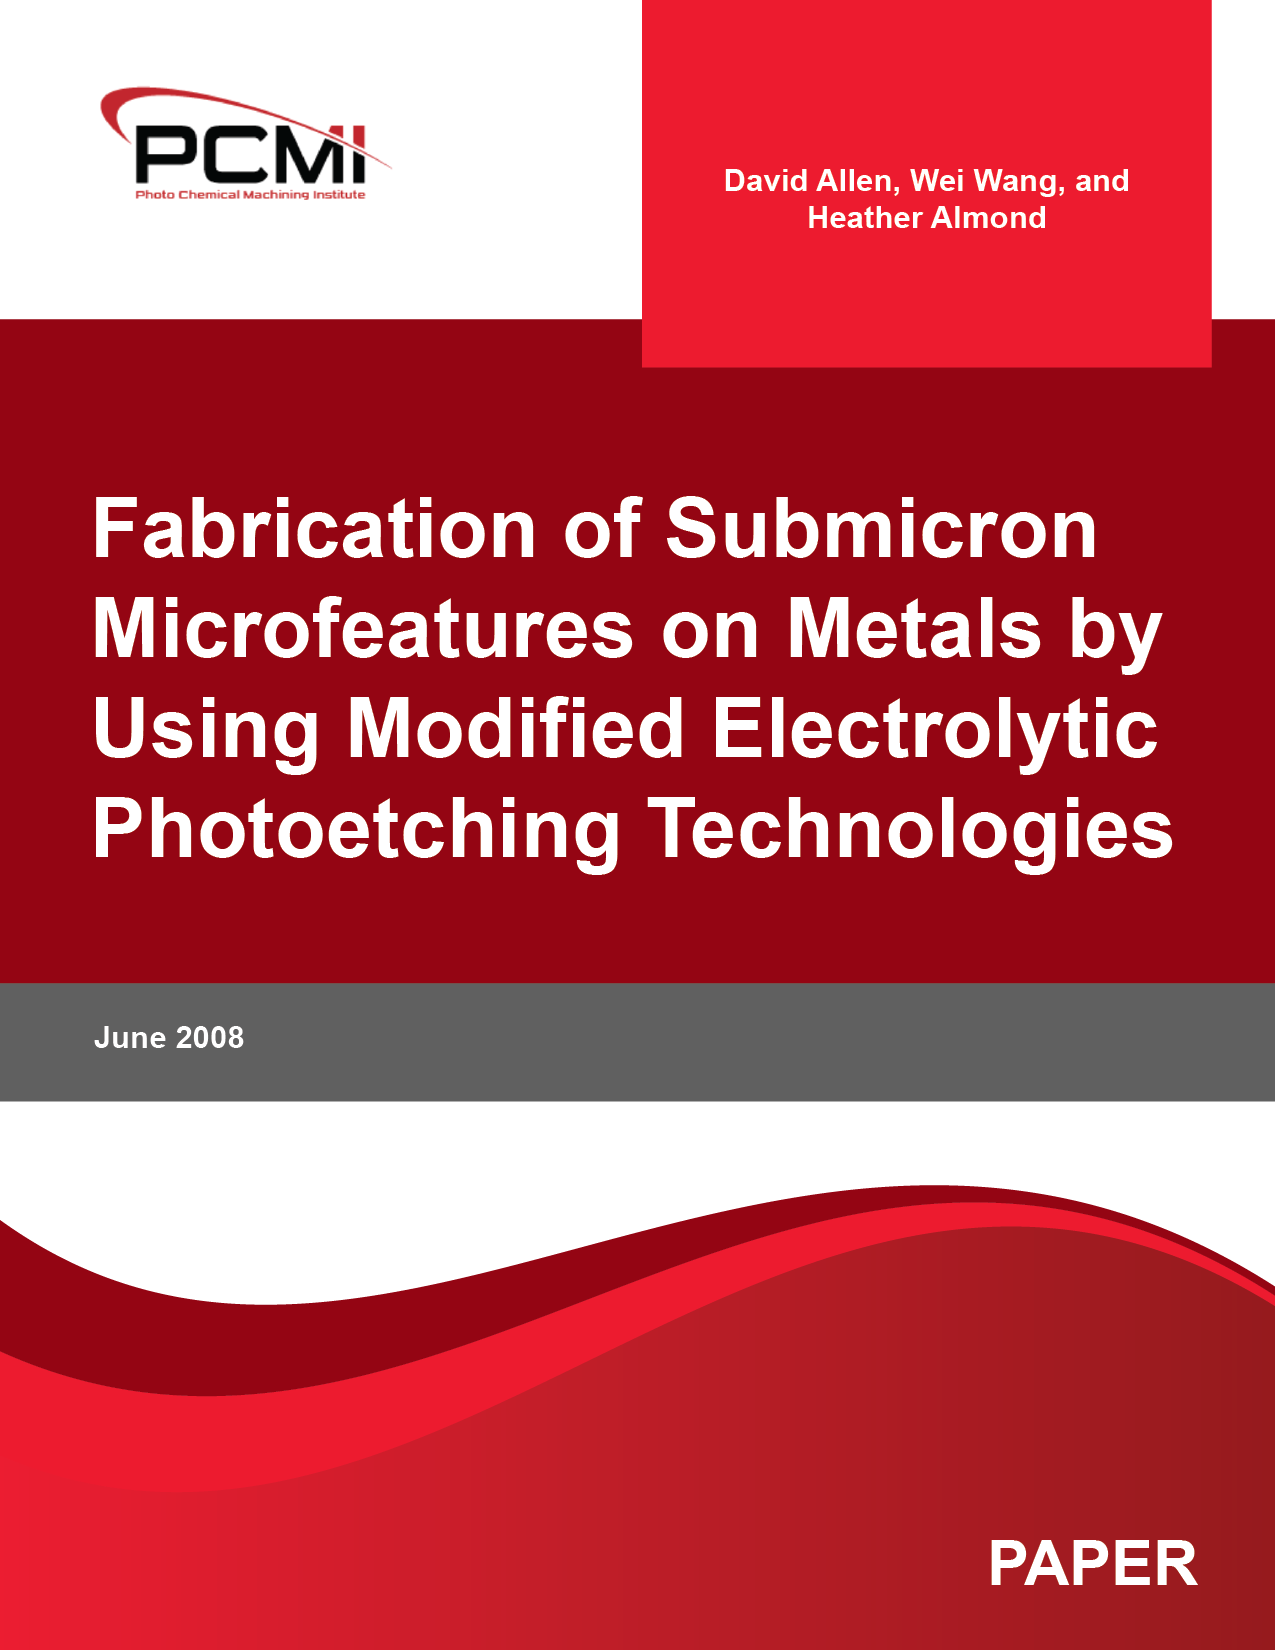 Fabrication of Submicron Microfeatures on Metals by Using Modified Electrolytic Photoetching Technologies